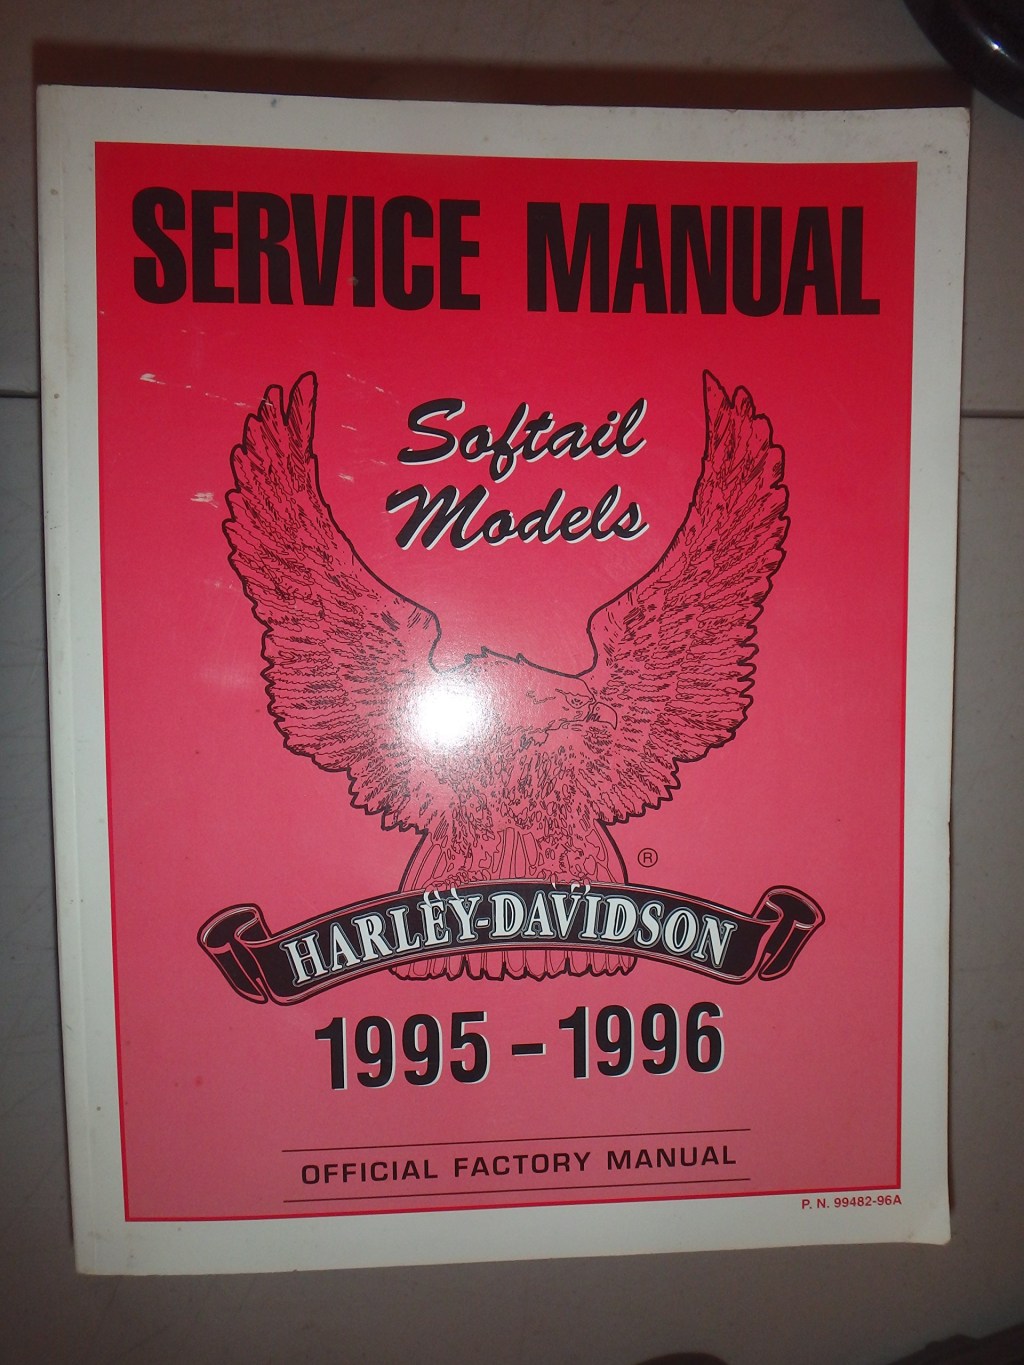 Picture of: Service Manual Softail Models Harley Davidson – Official